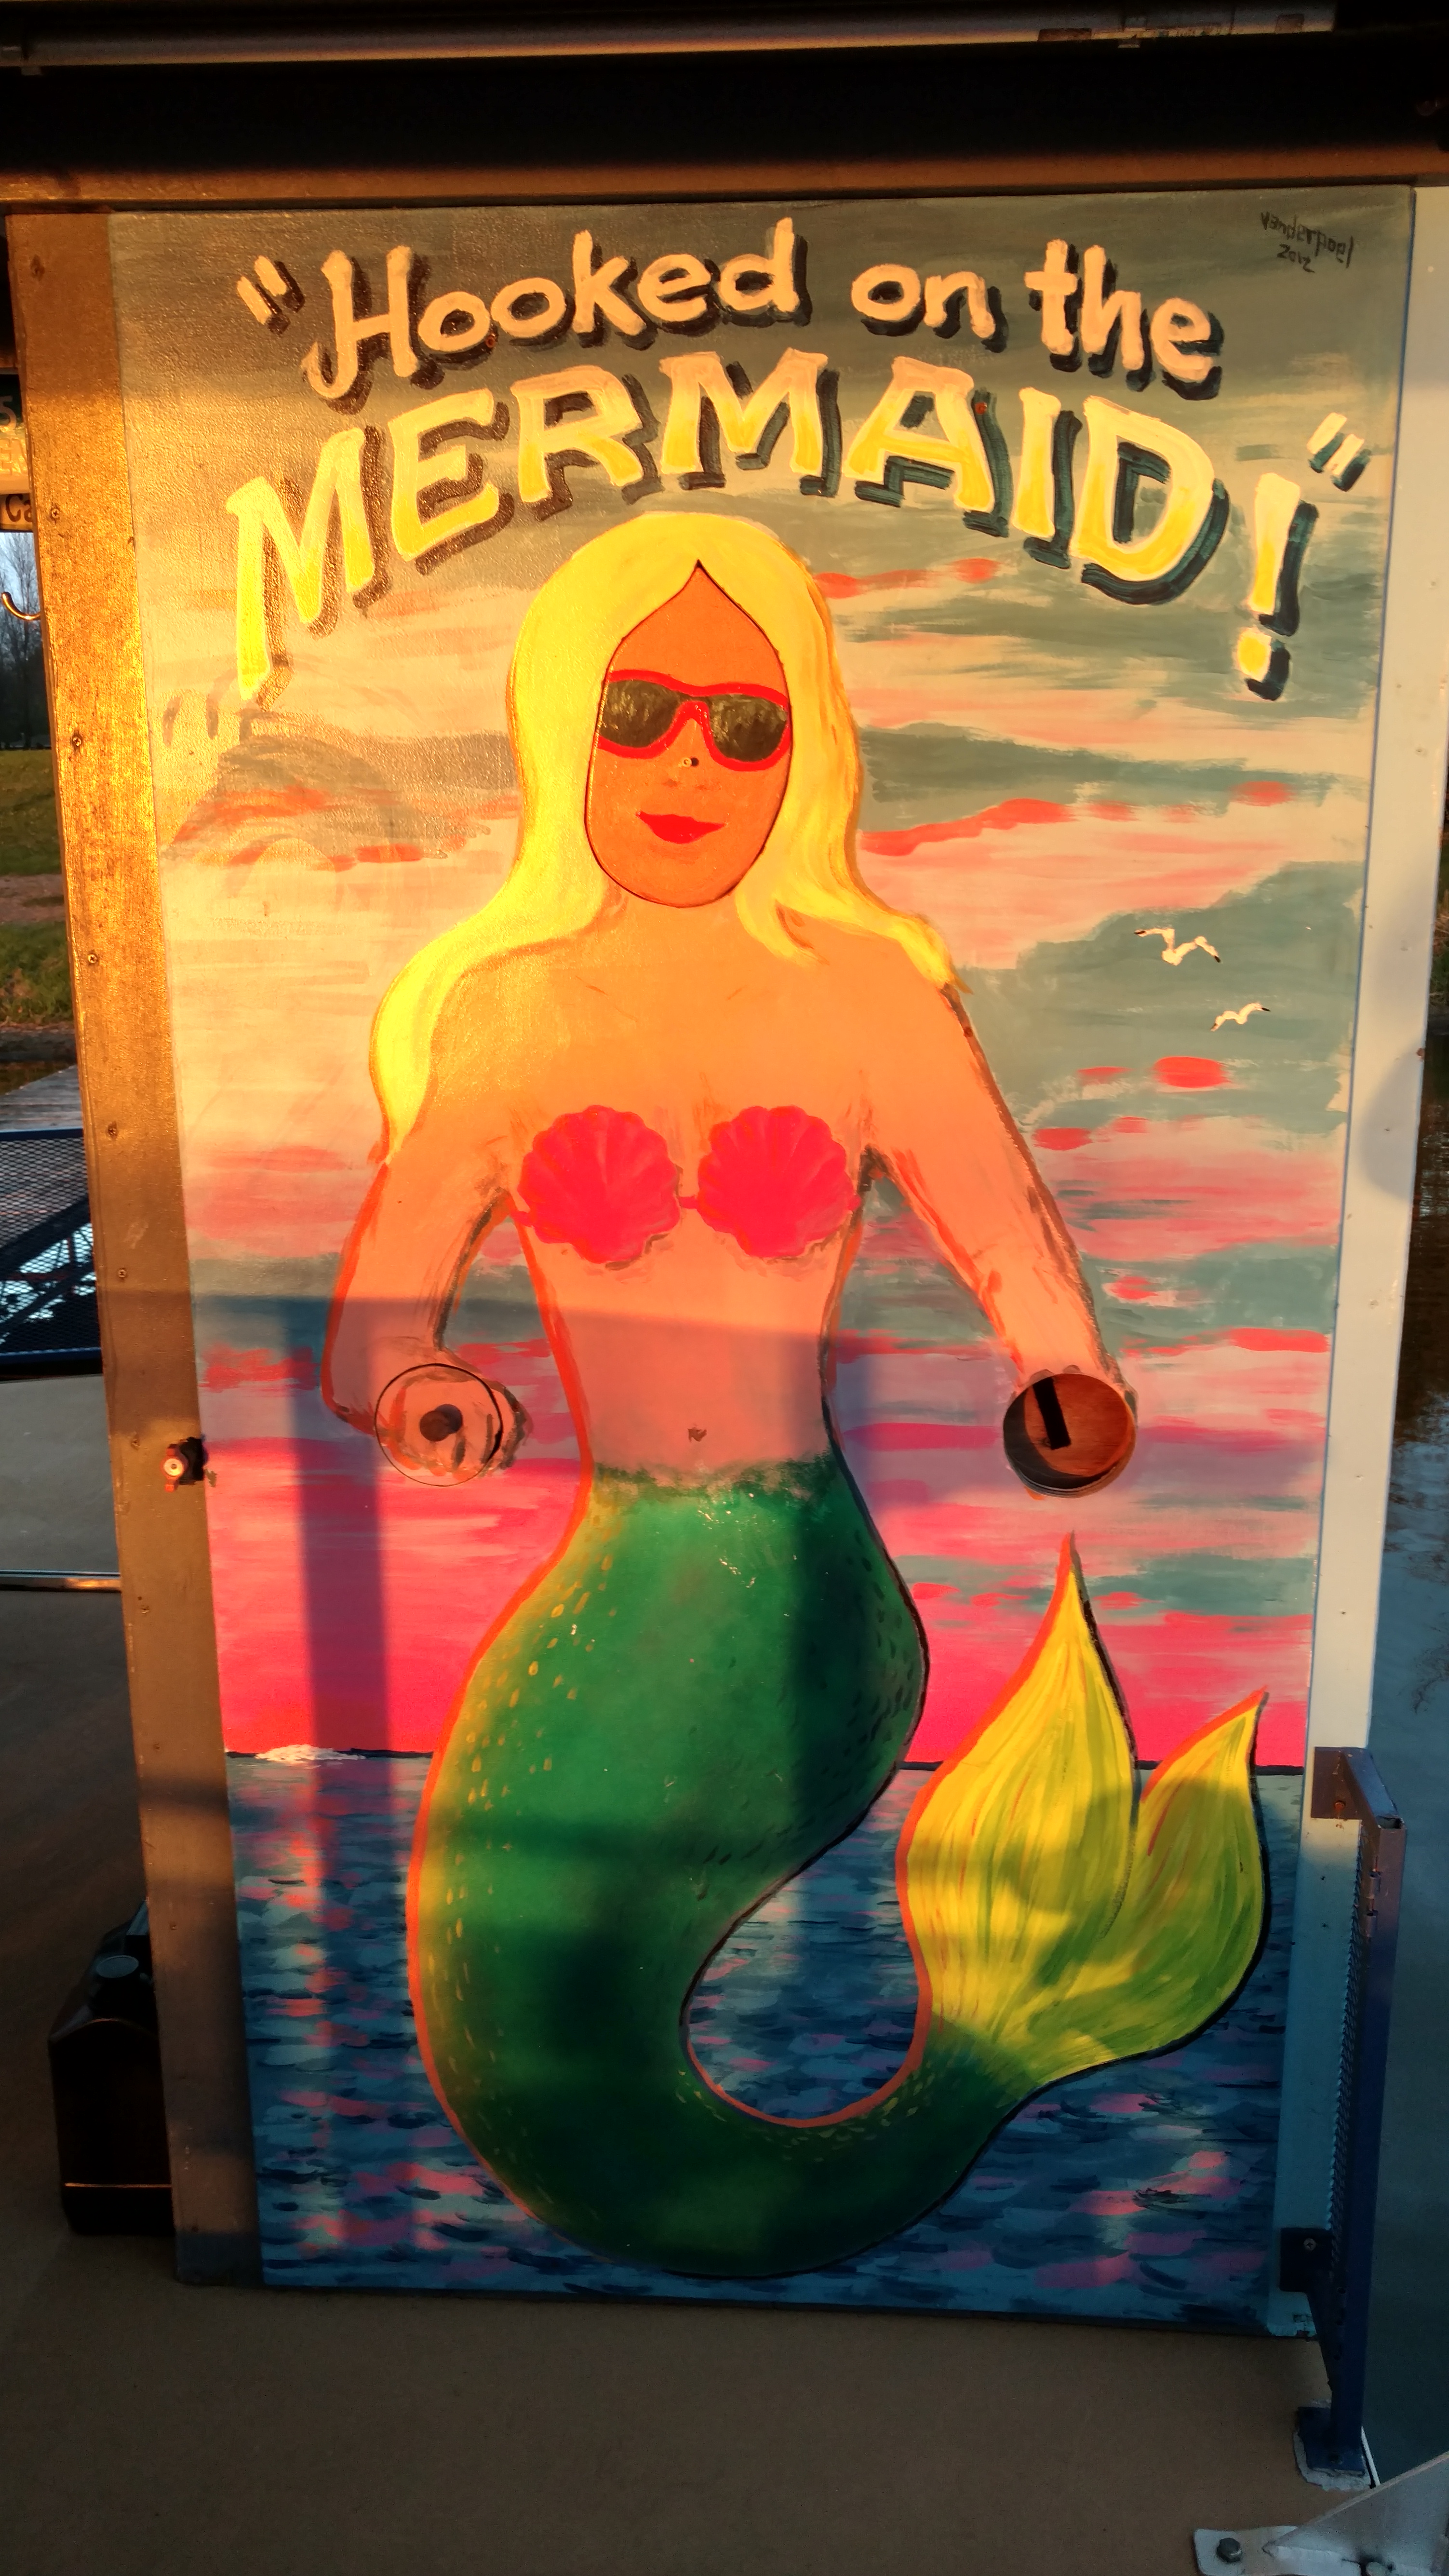 Picture of a mermaid with sunglasses on